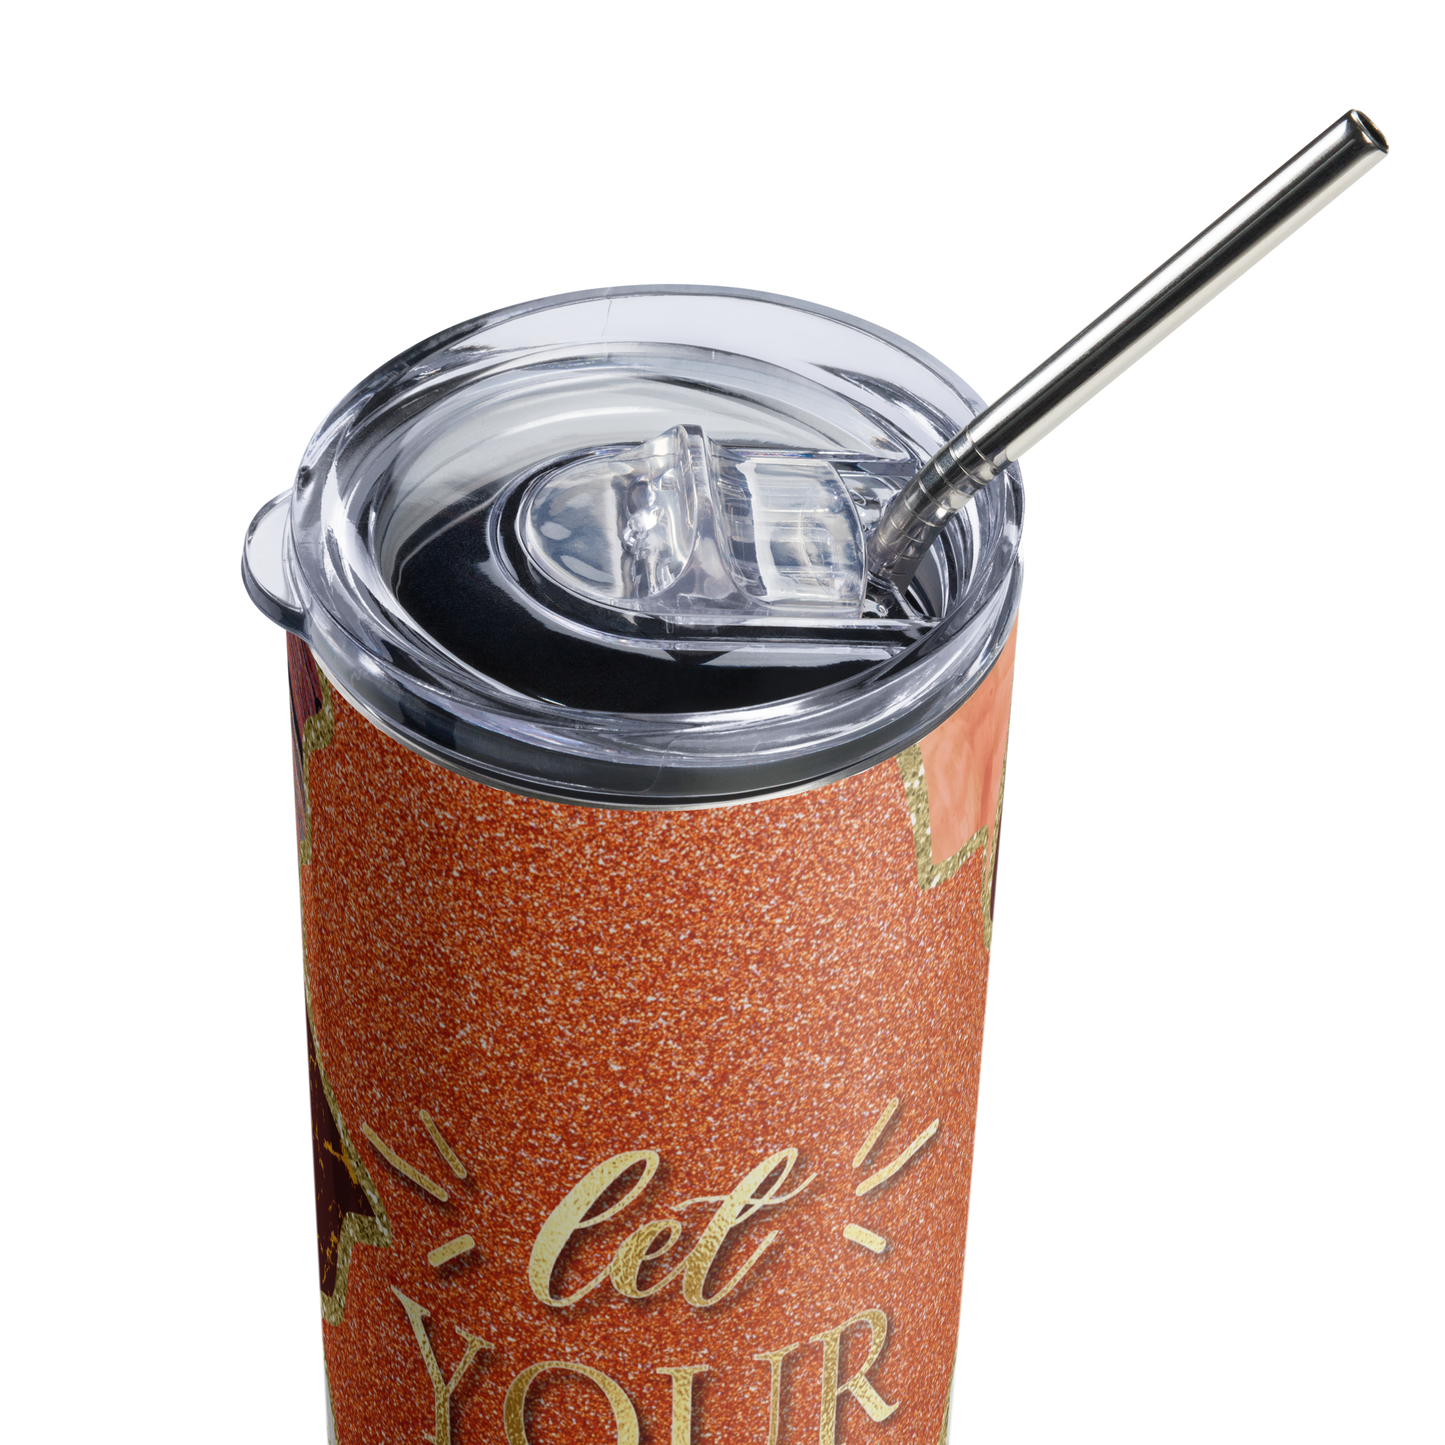 Carry the empowering message of "Let Your Light Shine" wherever you go with this 20 oz stainless steel tumbler, beautifully crafted to keep your beverages at the right temperature, and complete with a secure lid and straw for added convenience.